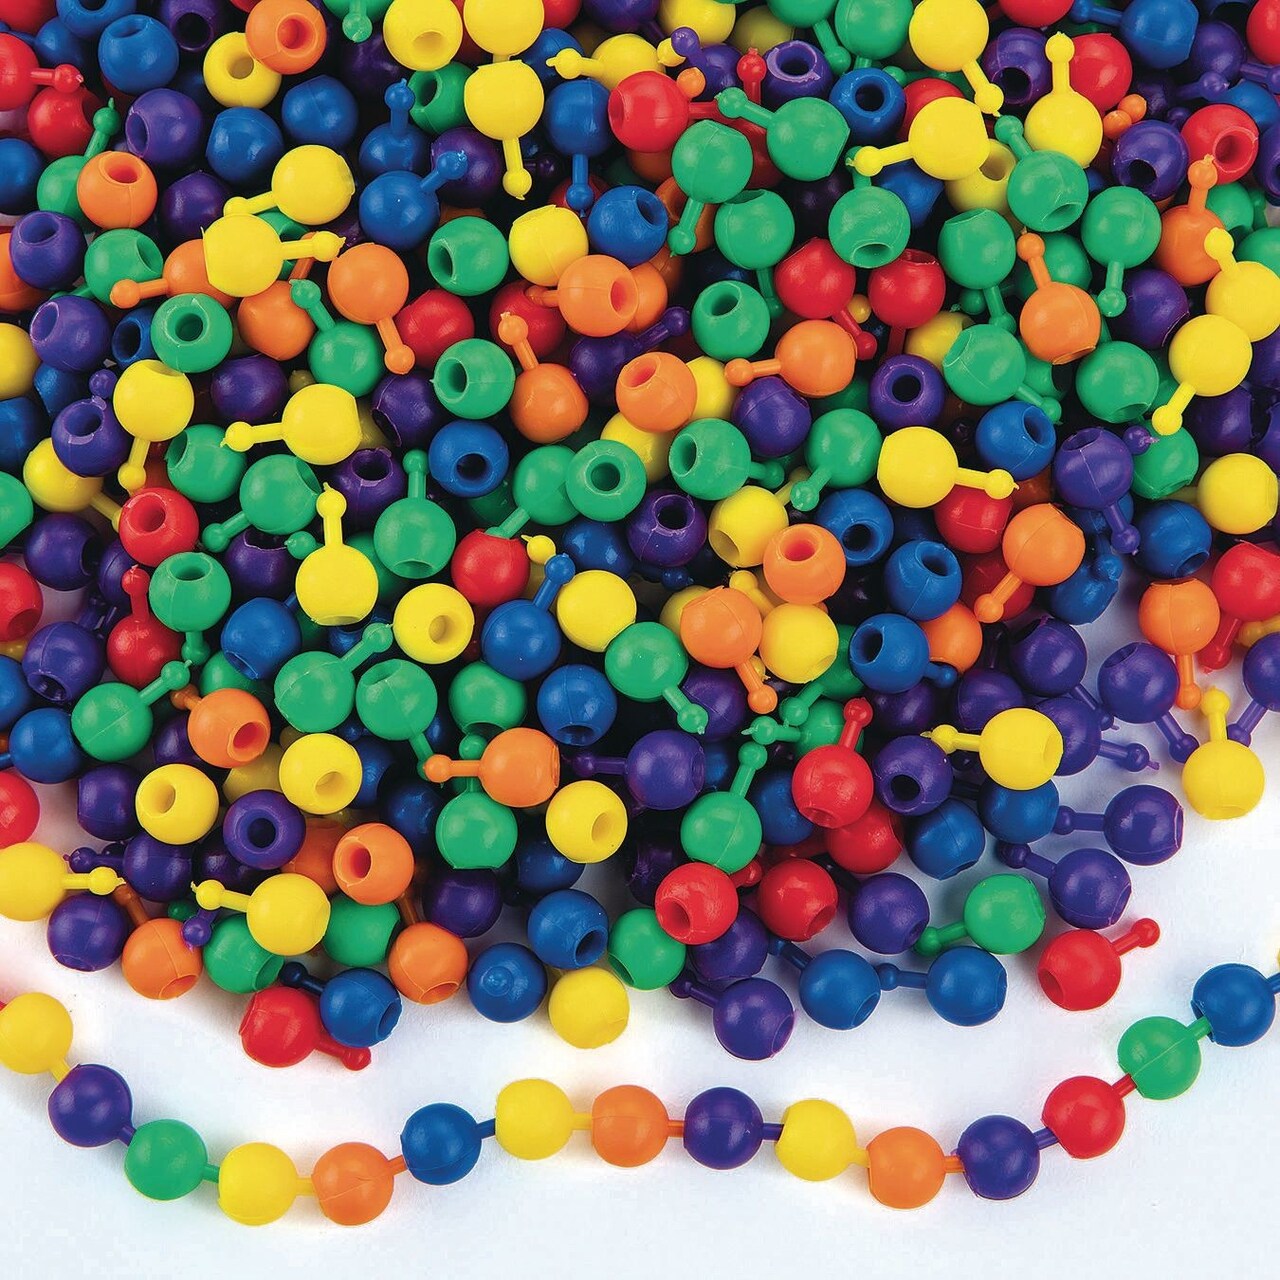 S&S Worldwide Color Splash! Pop Beads, 6 Assorted Bright Colors